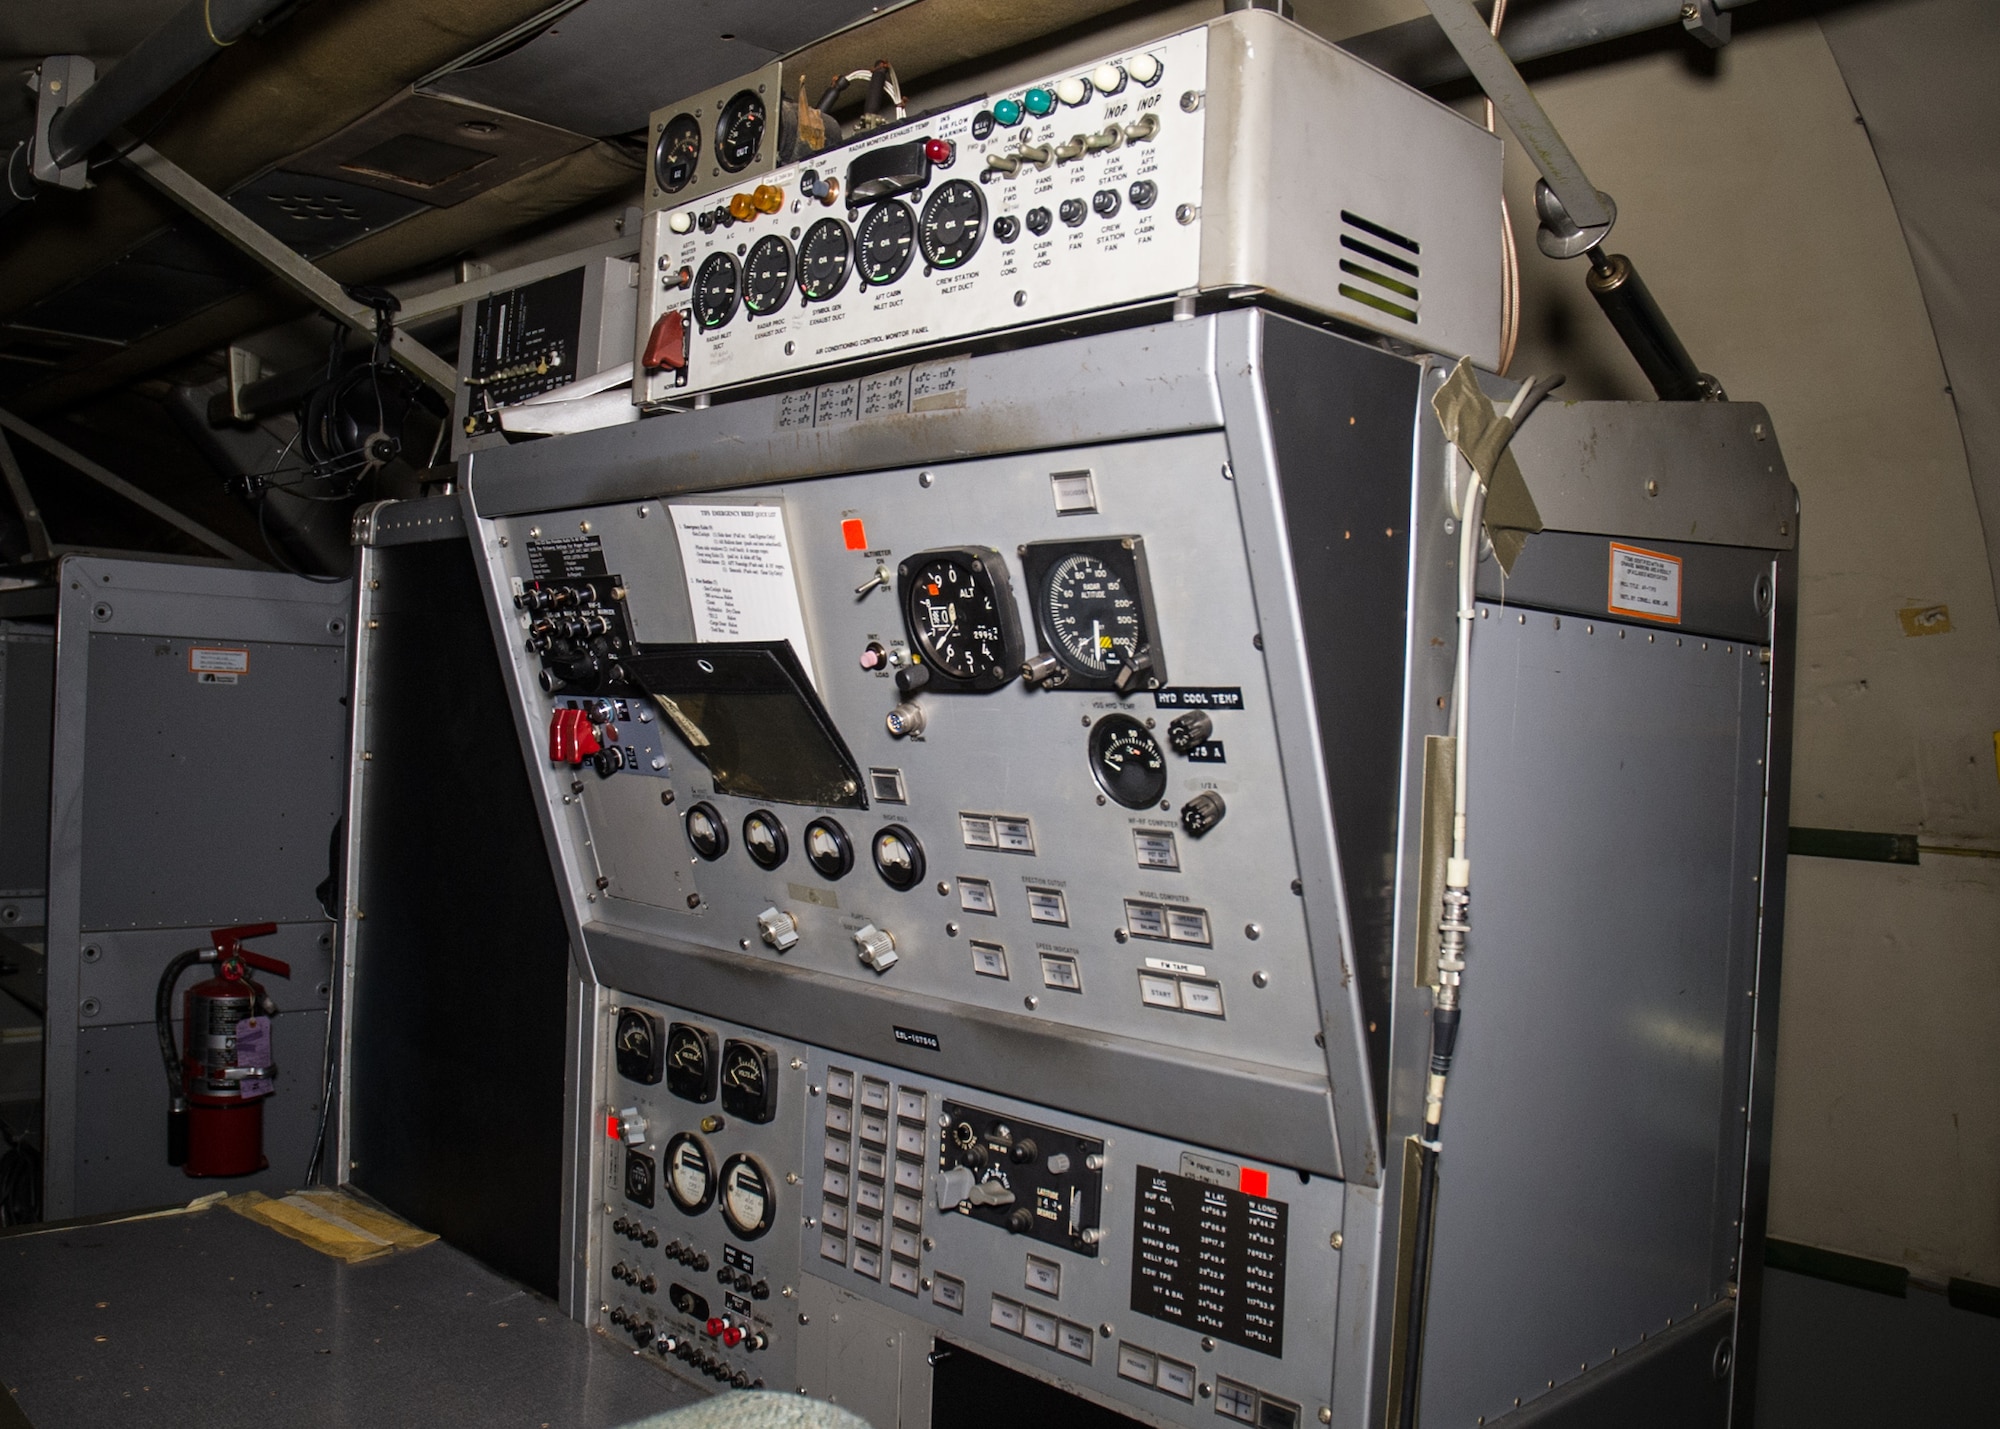 DAYTON, Ohio -- Convair NC-131H Total In-Flight Simulator (TIFS) interior view in the Research & Development Gallery at the National Museum of the United States Air Force. (U.S. Air Force photo by Ken LaRock)
